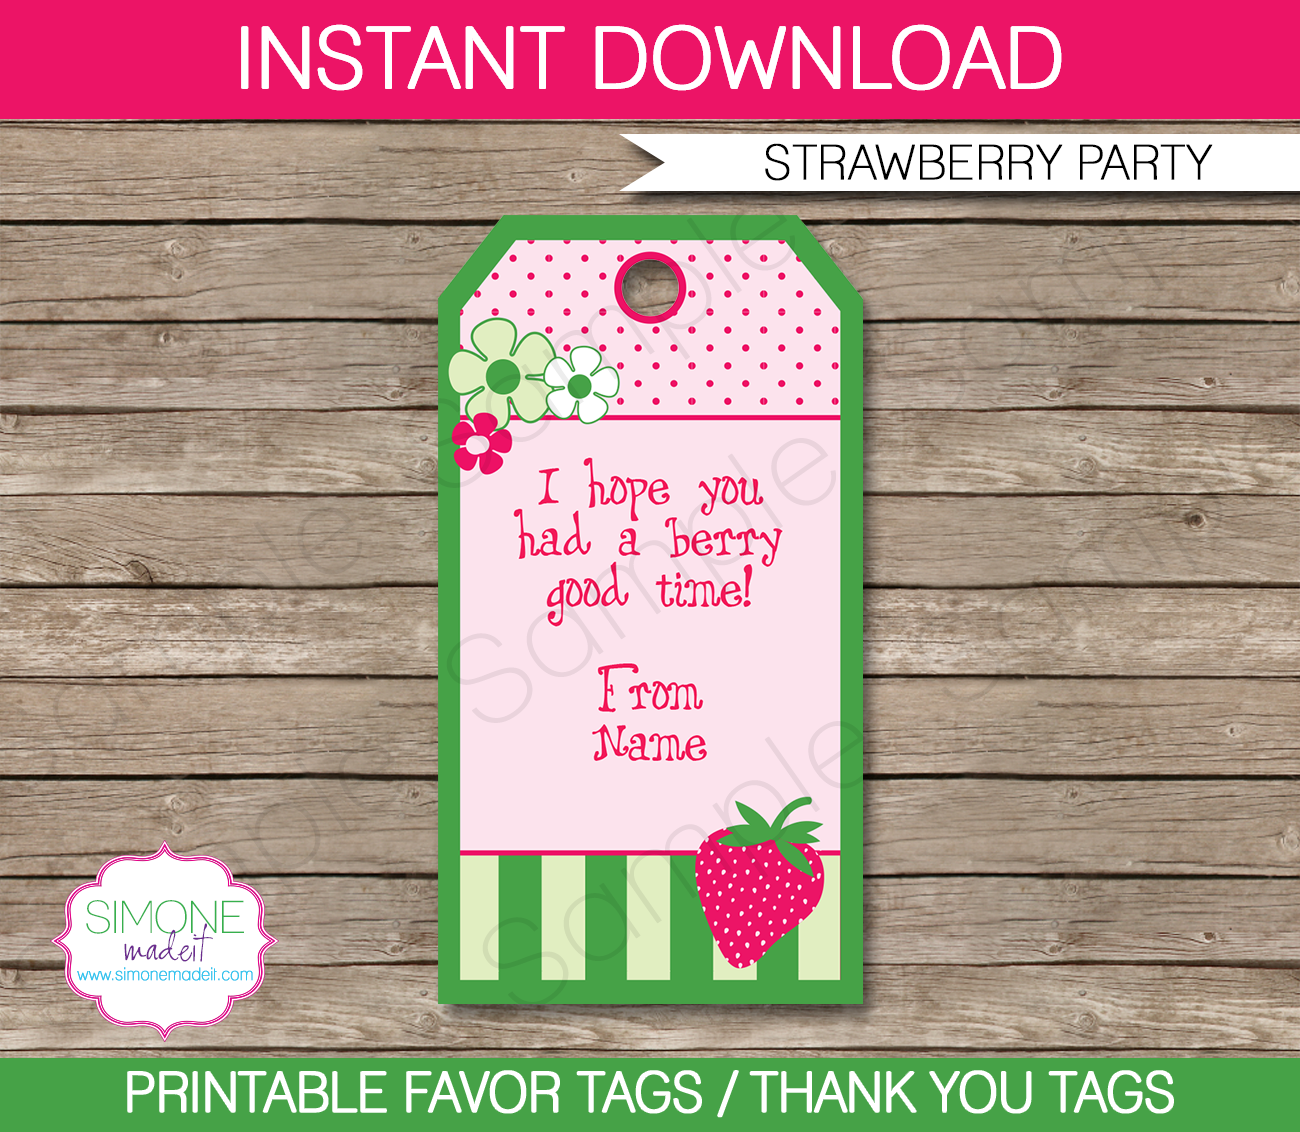 Strawberry Shortcake Party Favor Tags | Thank You Tags | Birthday Party | Editable DIY Template | $3.00 INSTANT DOWNLOAD via SIMONEmadeit.com